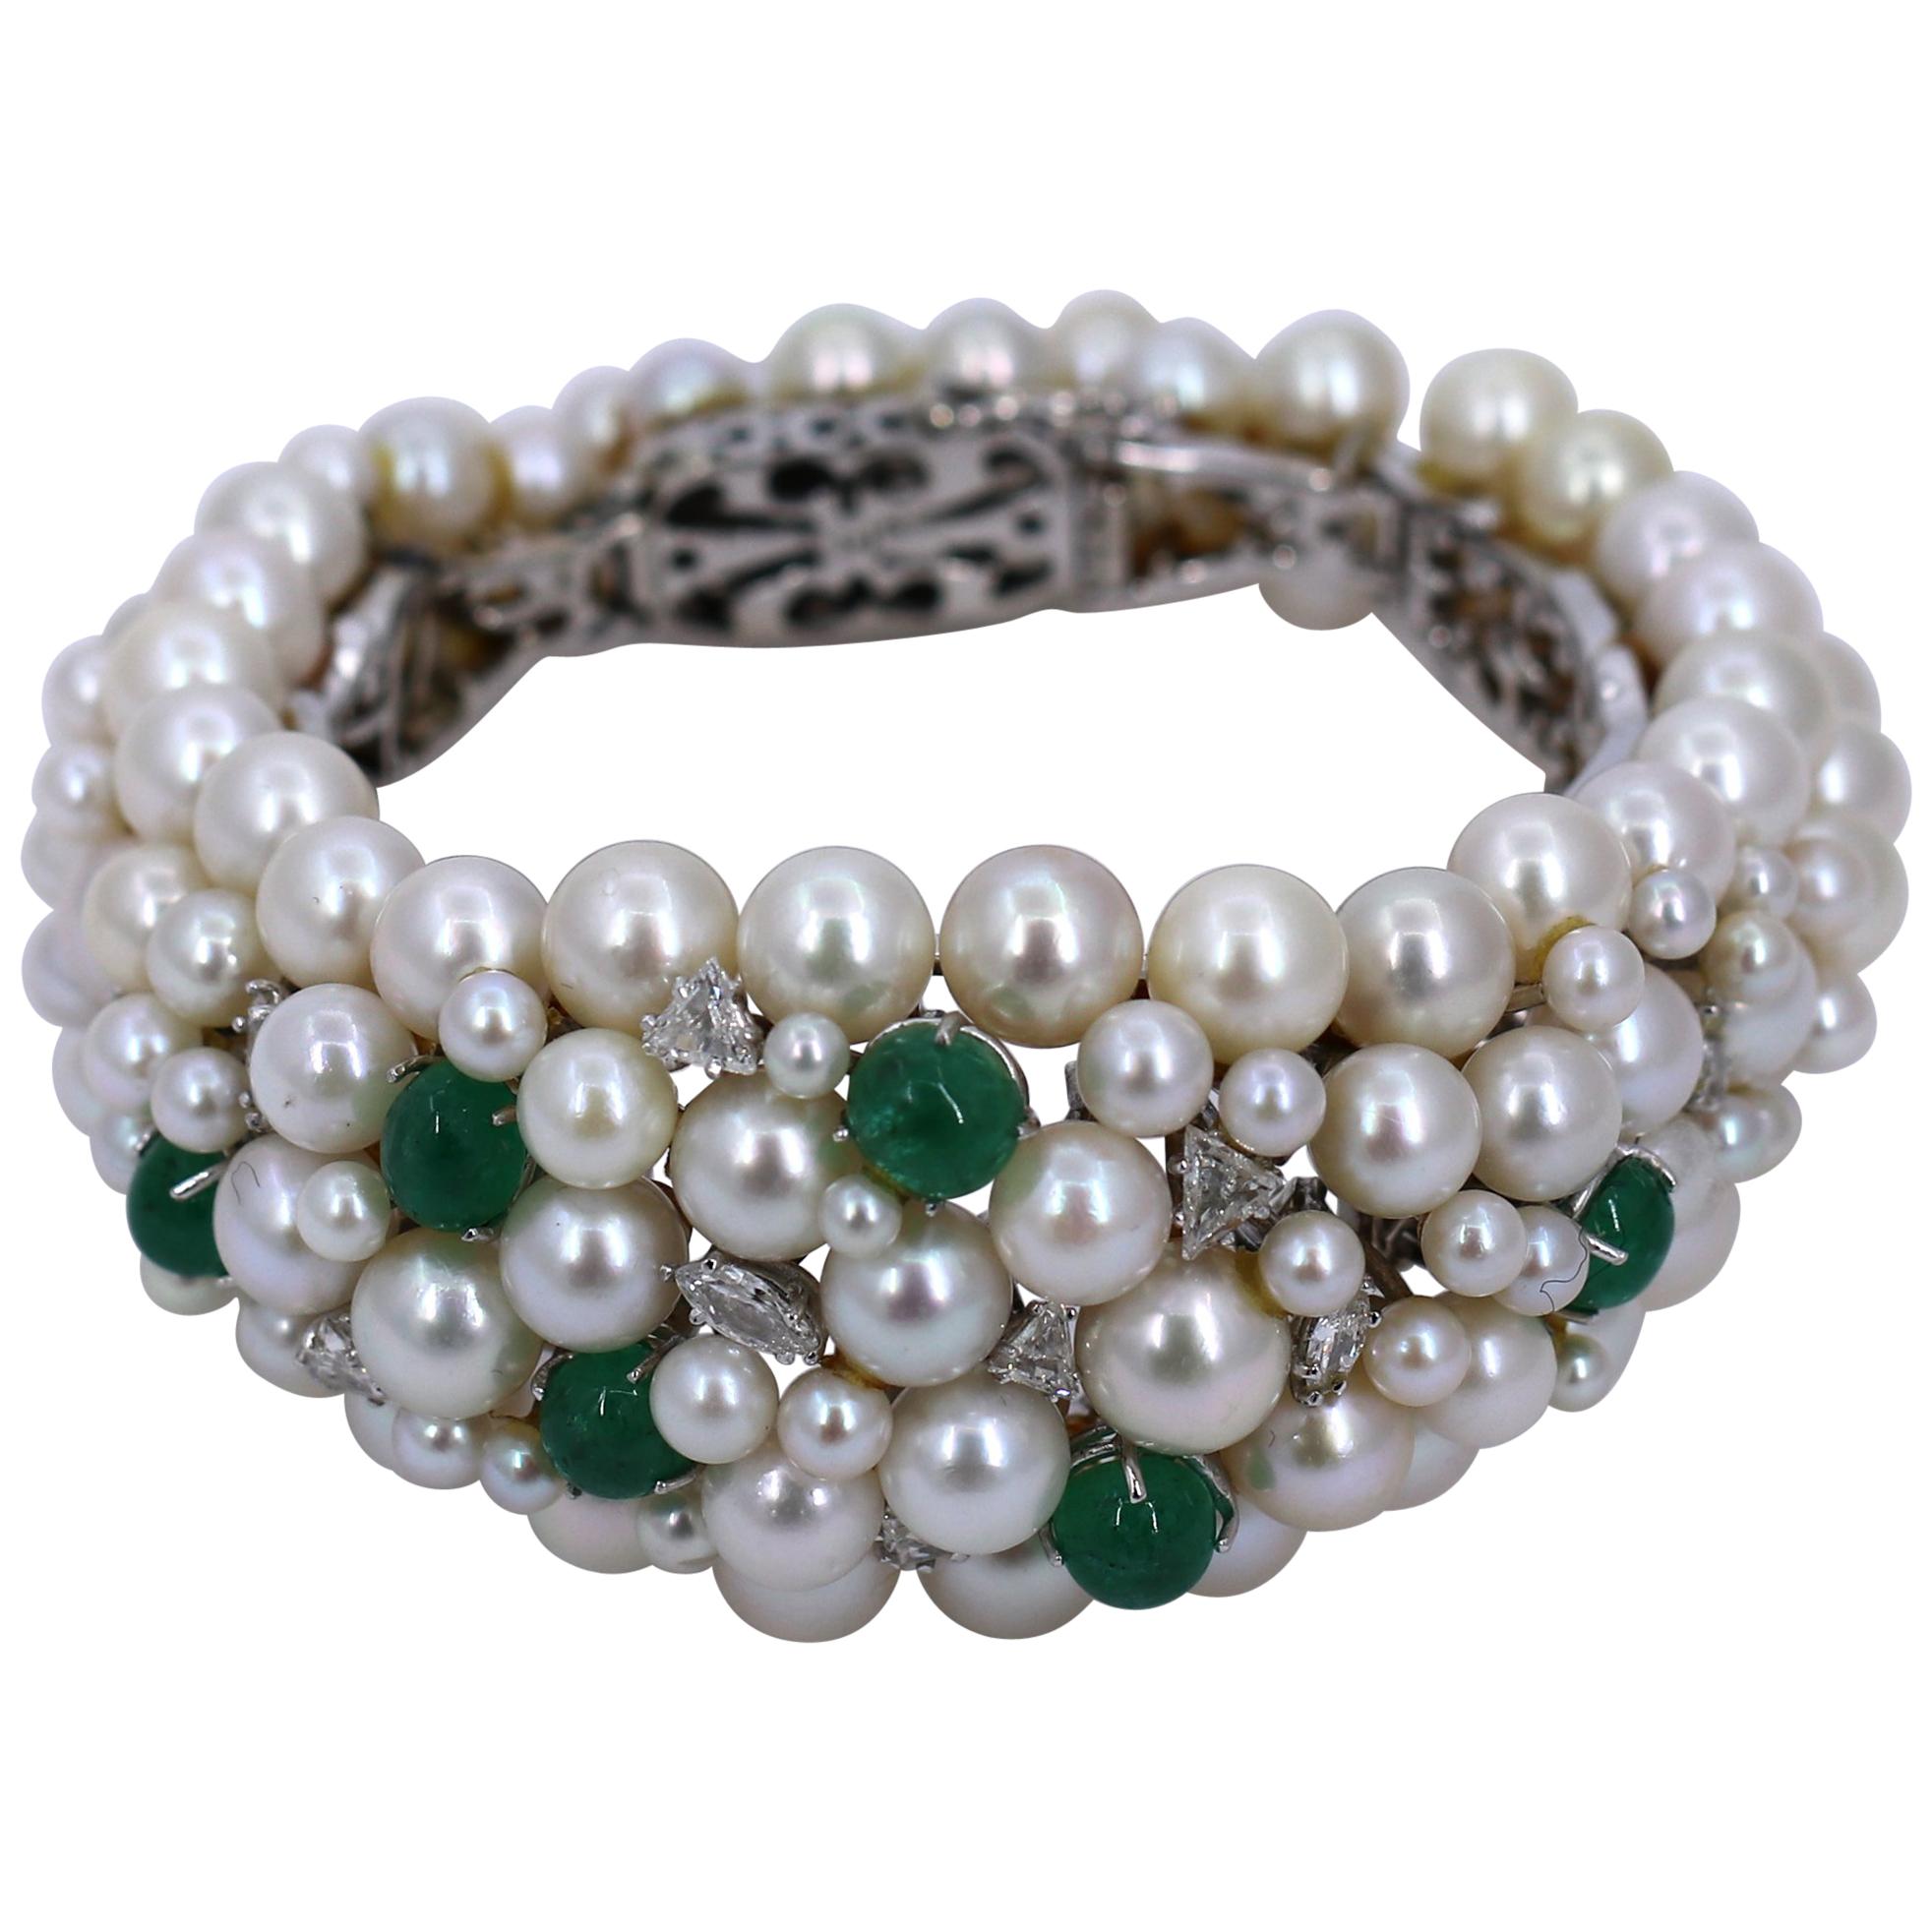 Midcentury White Gold Bracelet with Diamonds Emeralds and Pearls